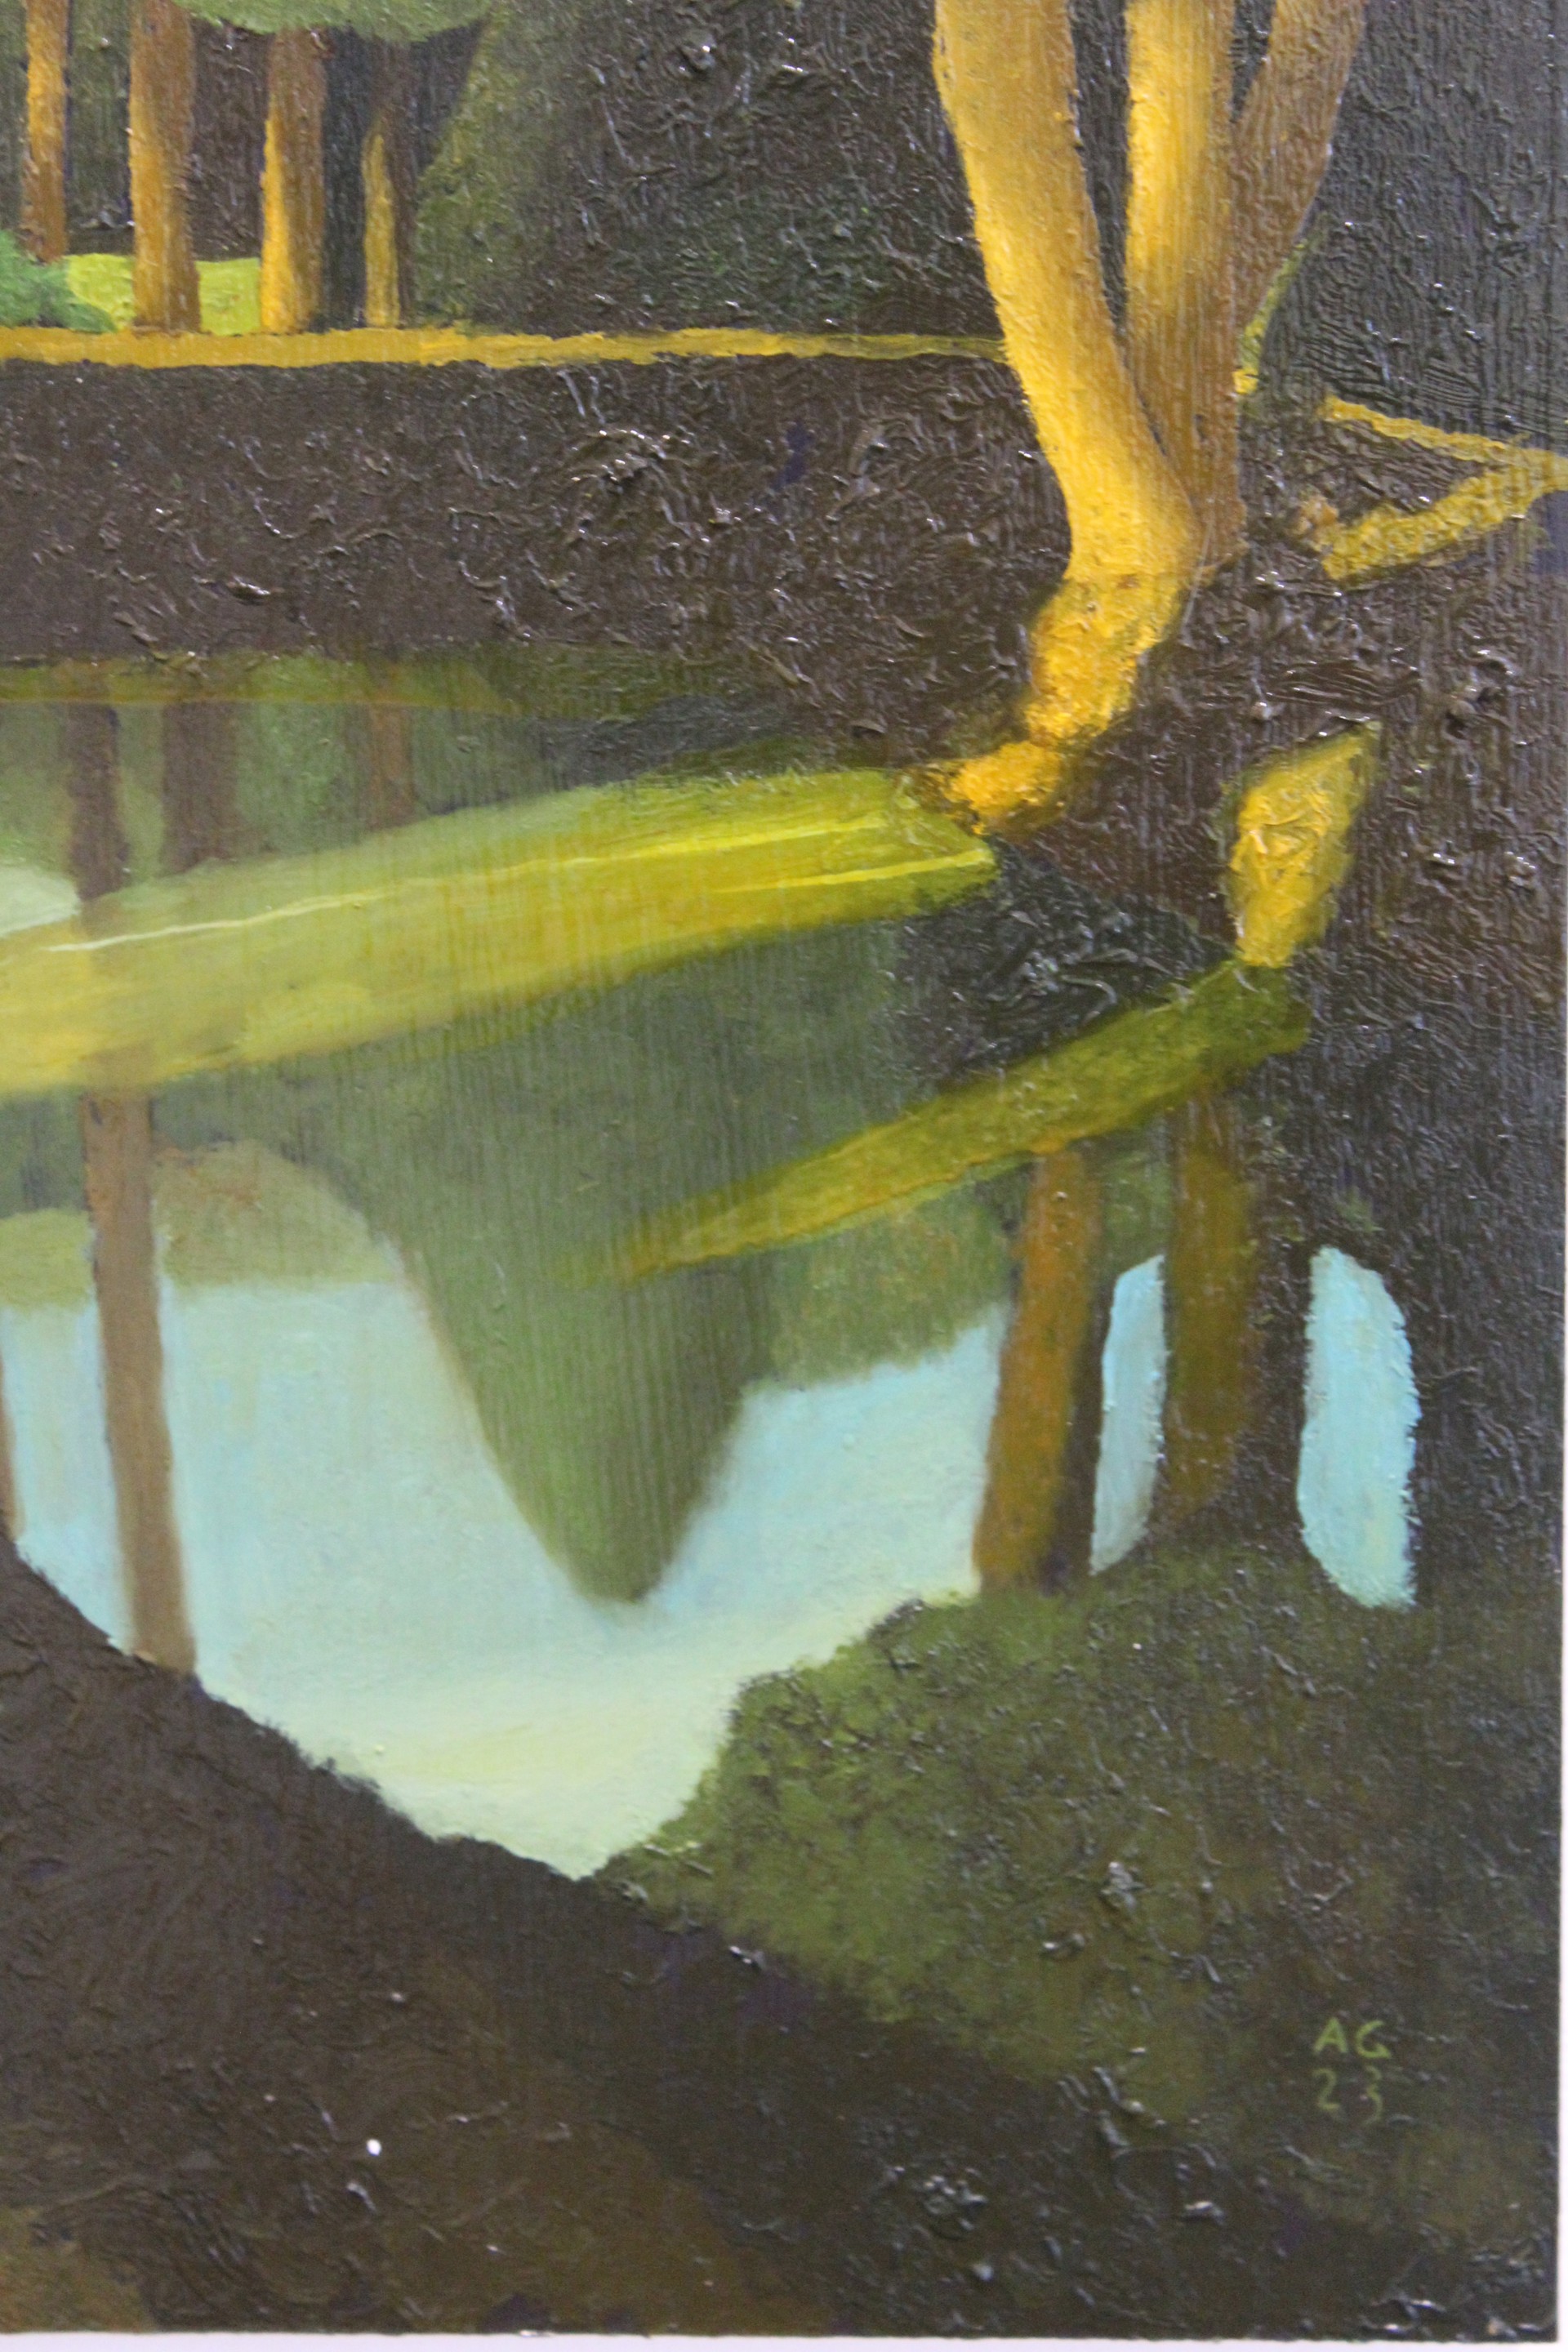 In the Shadow of the Forest (L189) by Alan Gerson